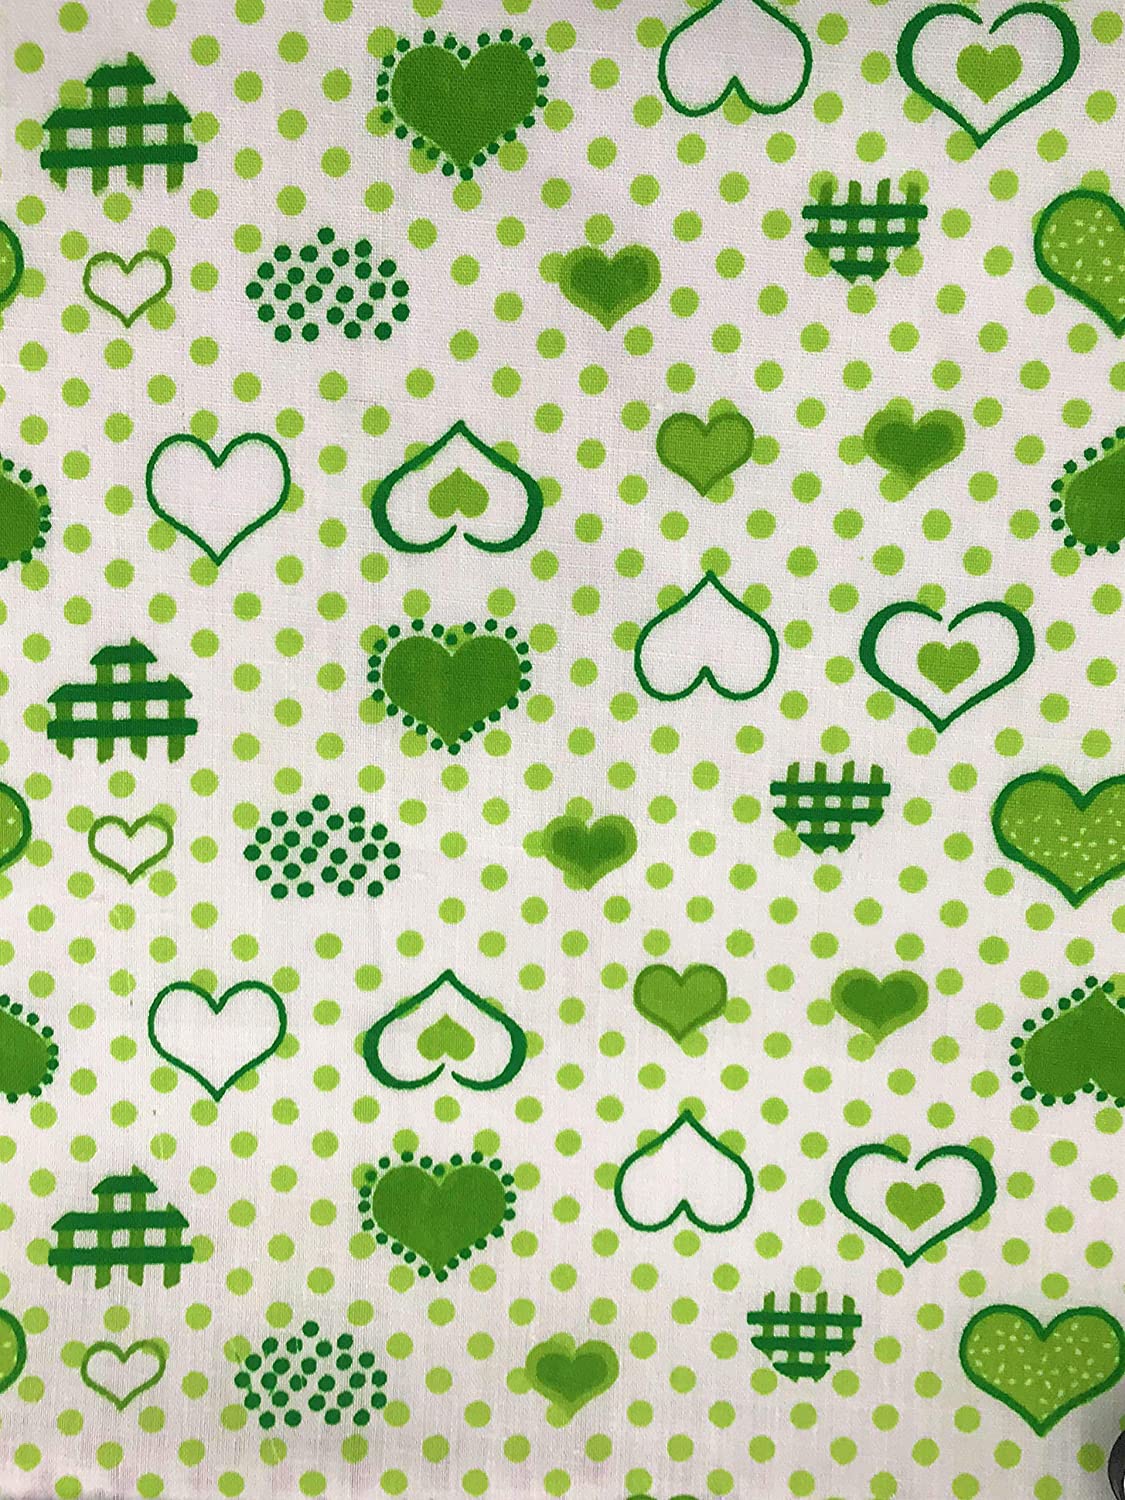 Heart Shapes and Dots Print Poly Cotton Fabric, Sells by The Yard, White/Green